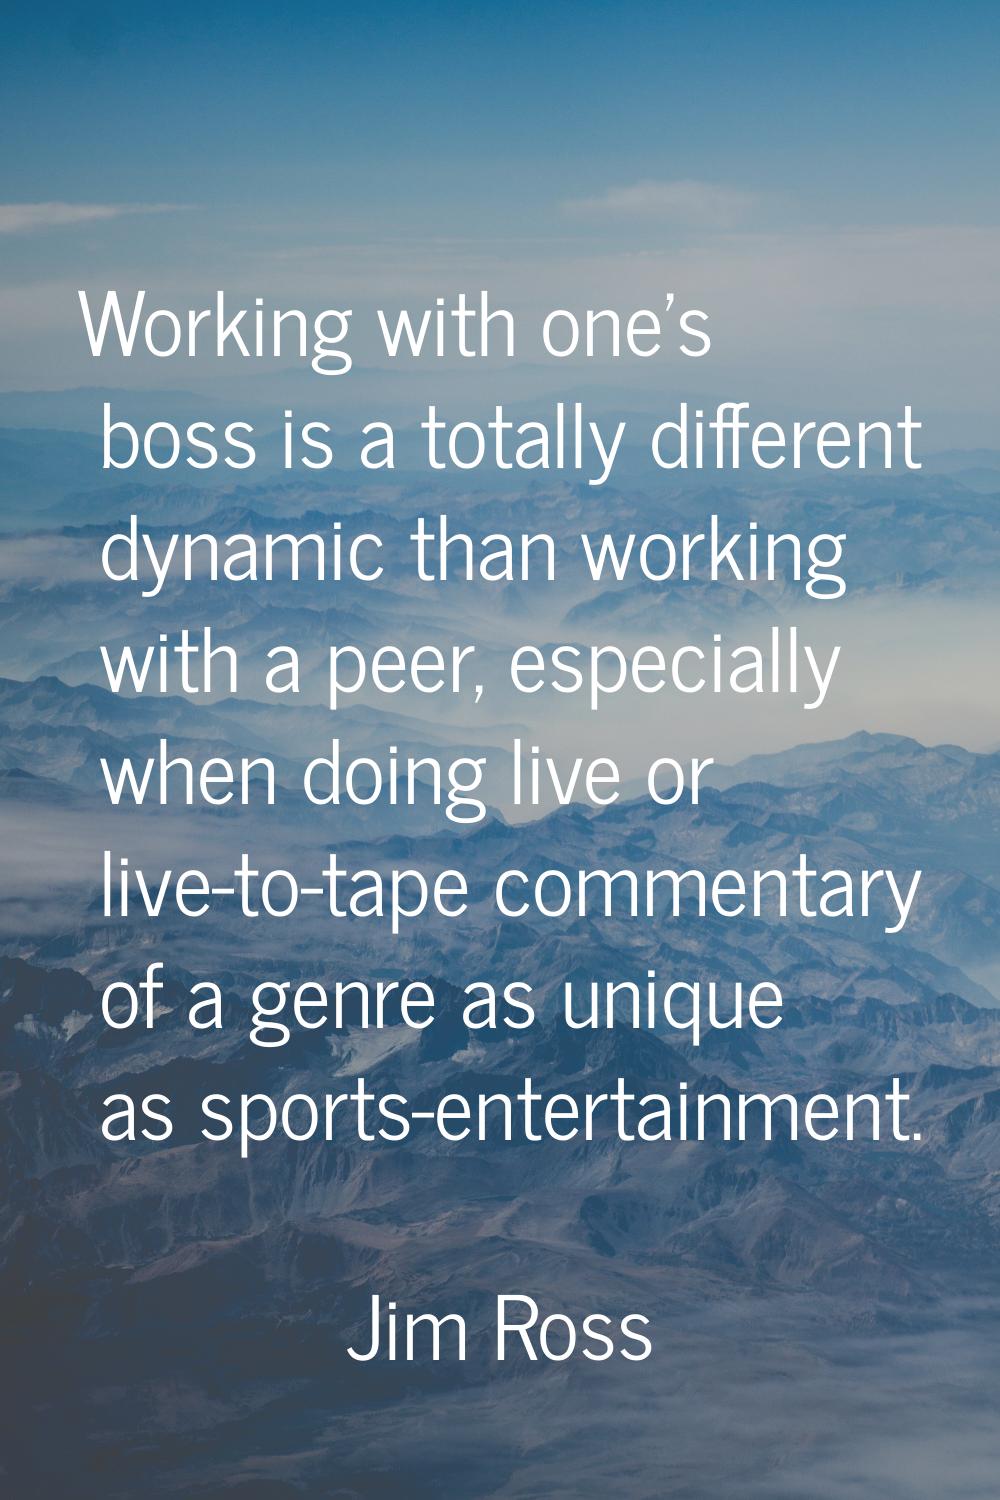 Working with one's boss is a totally different dynamic than working with a peer, especially when do